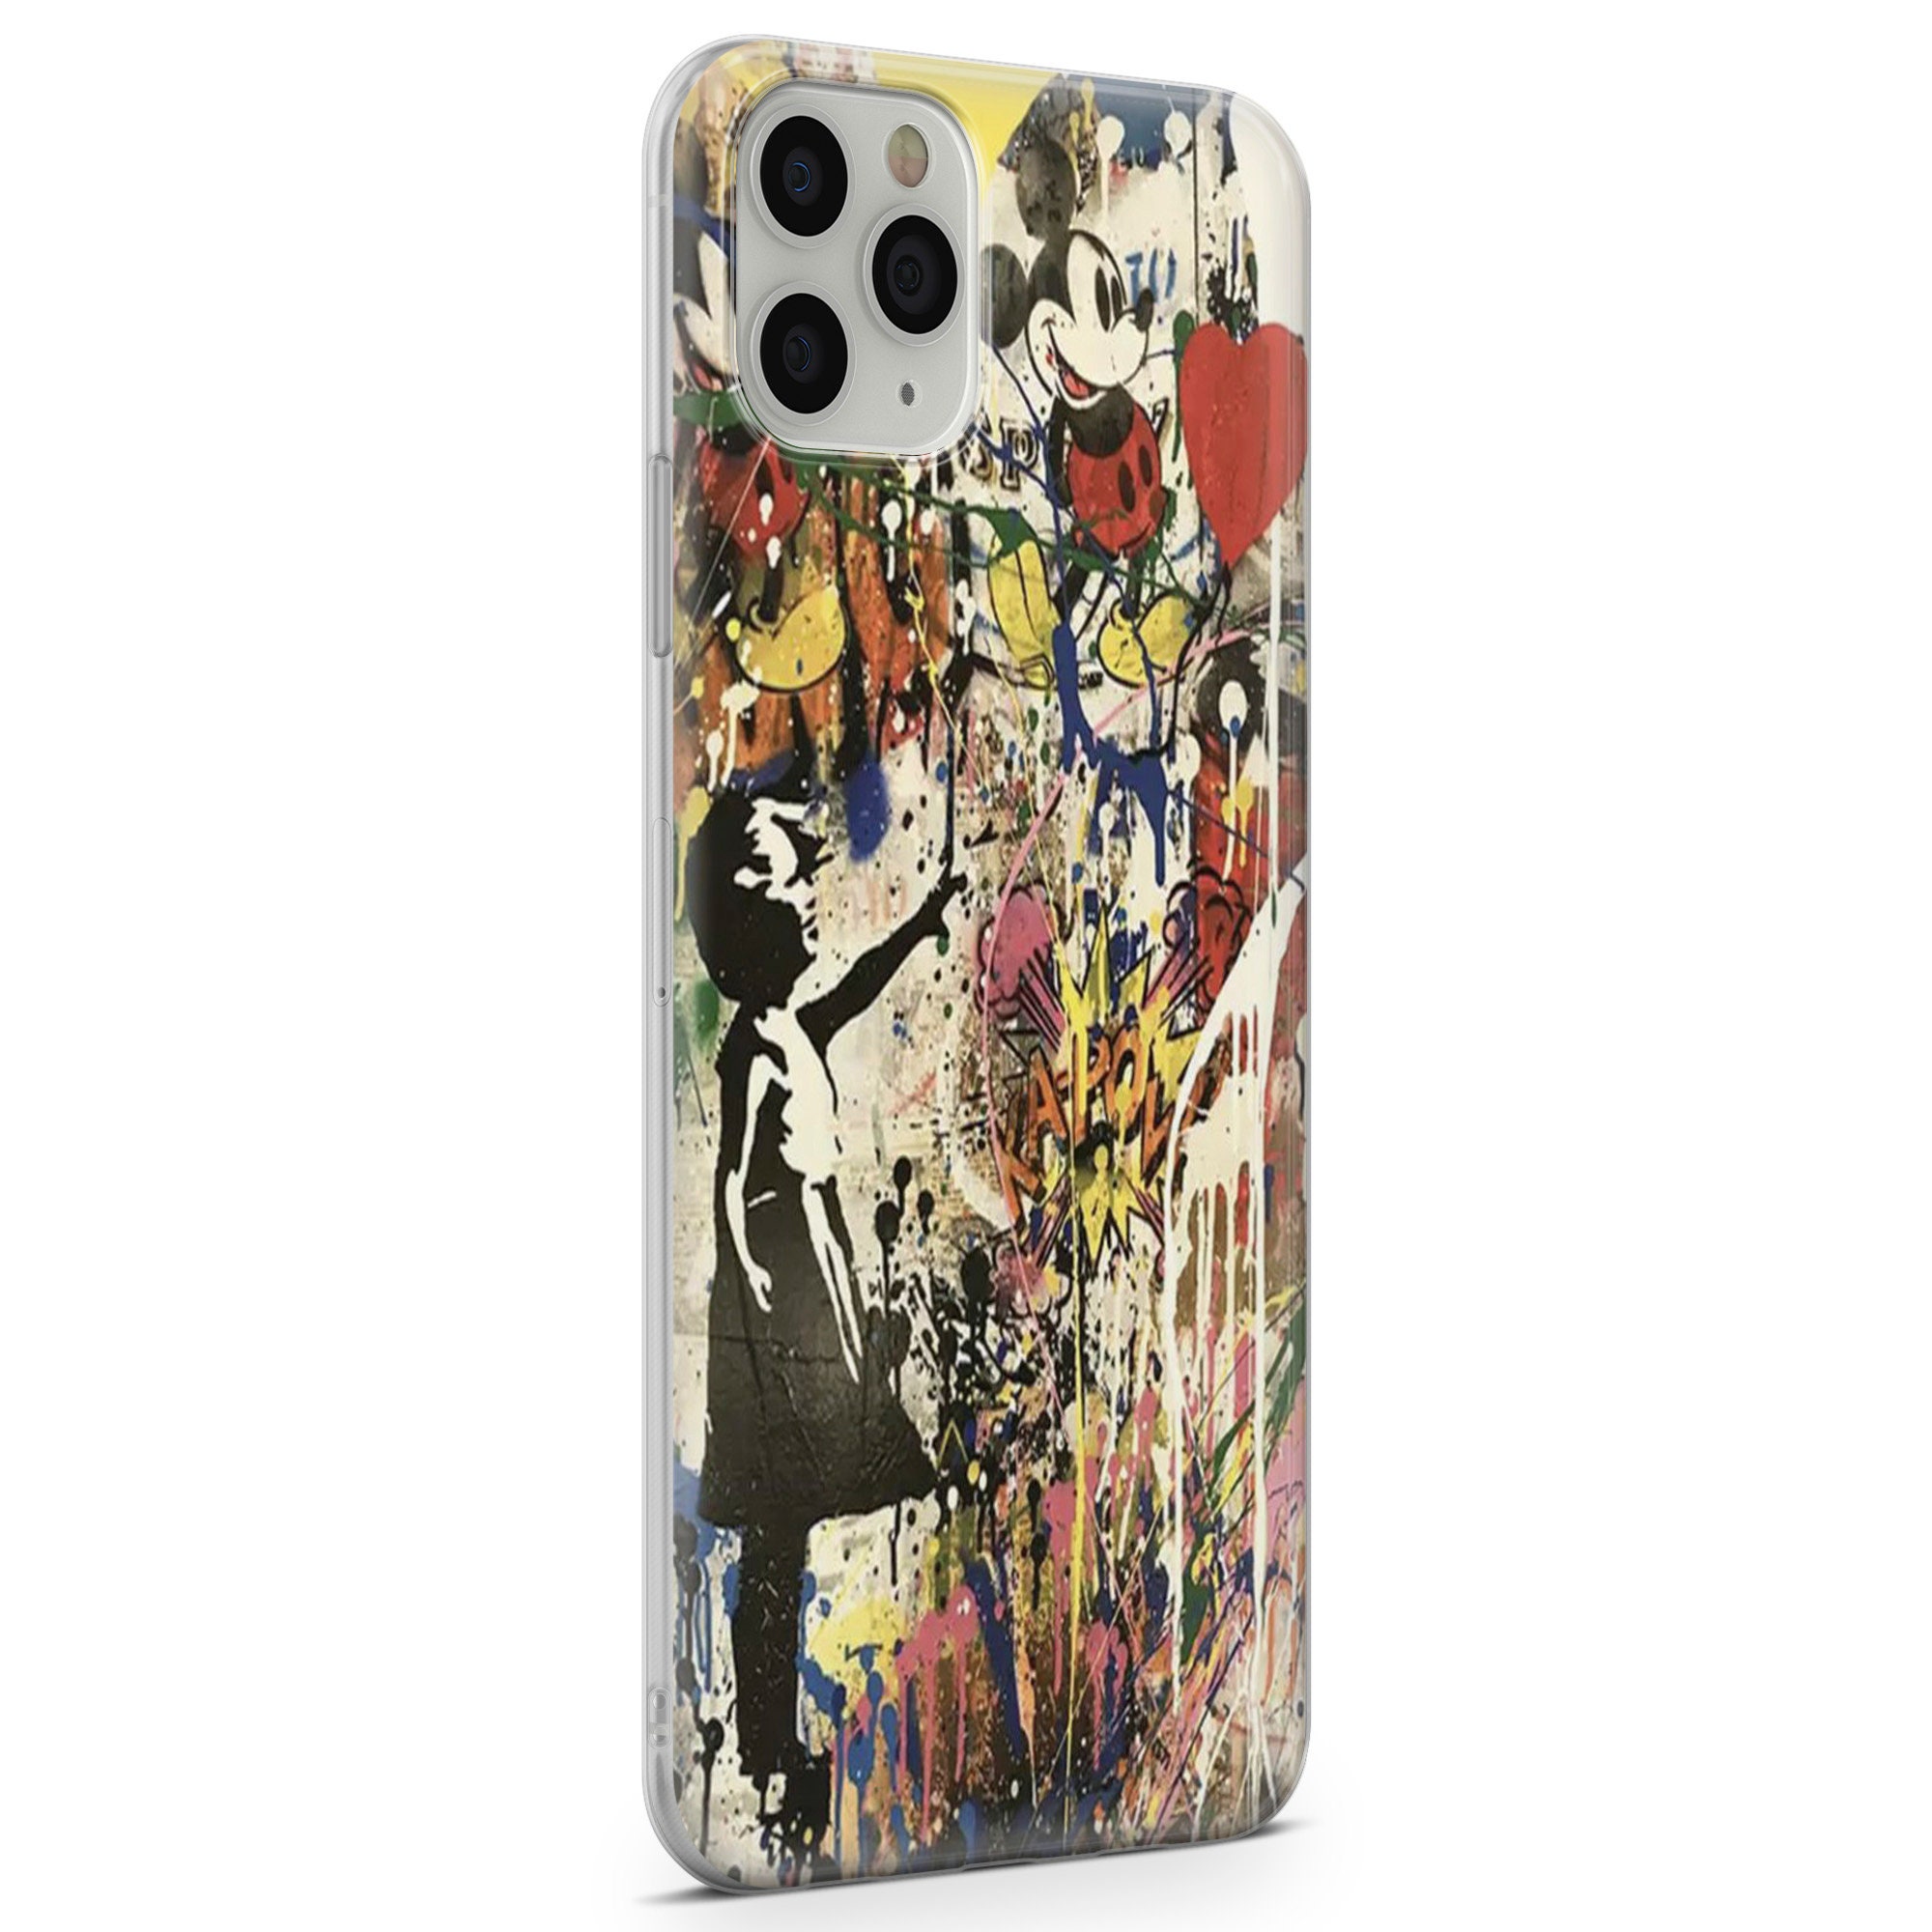 Black and White Graffiti iPhone Case for Sale by PRODUCTPICS